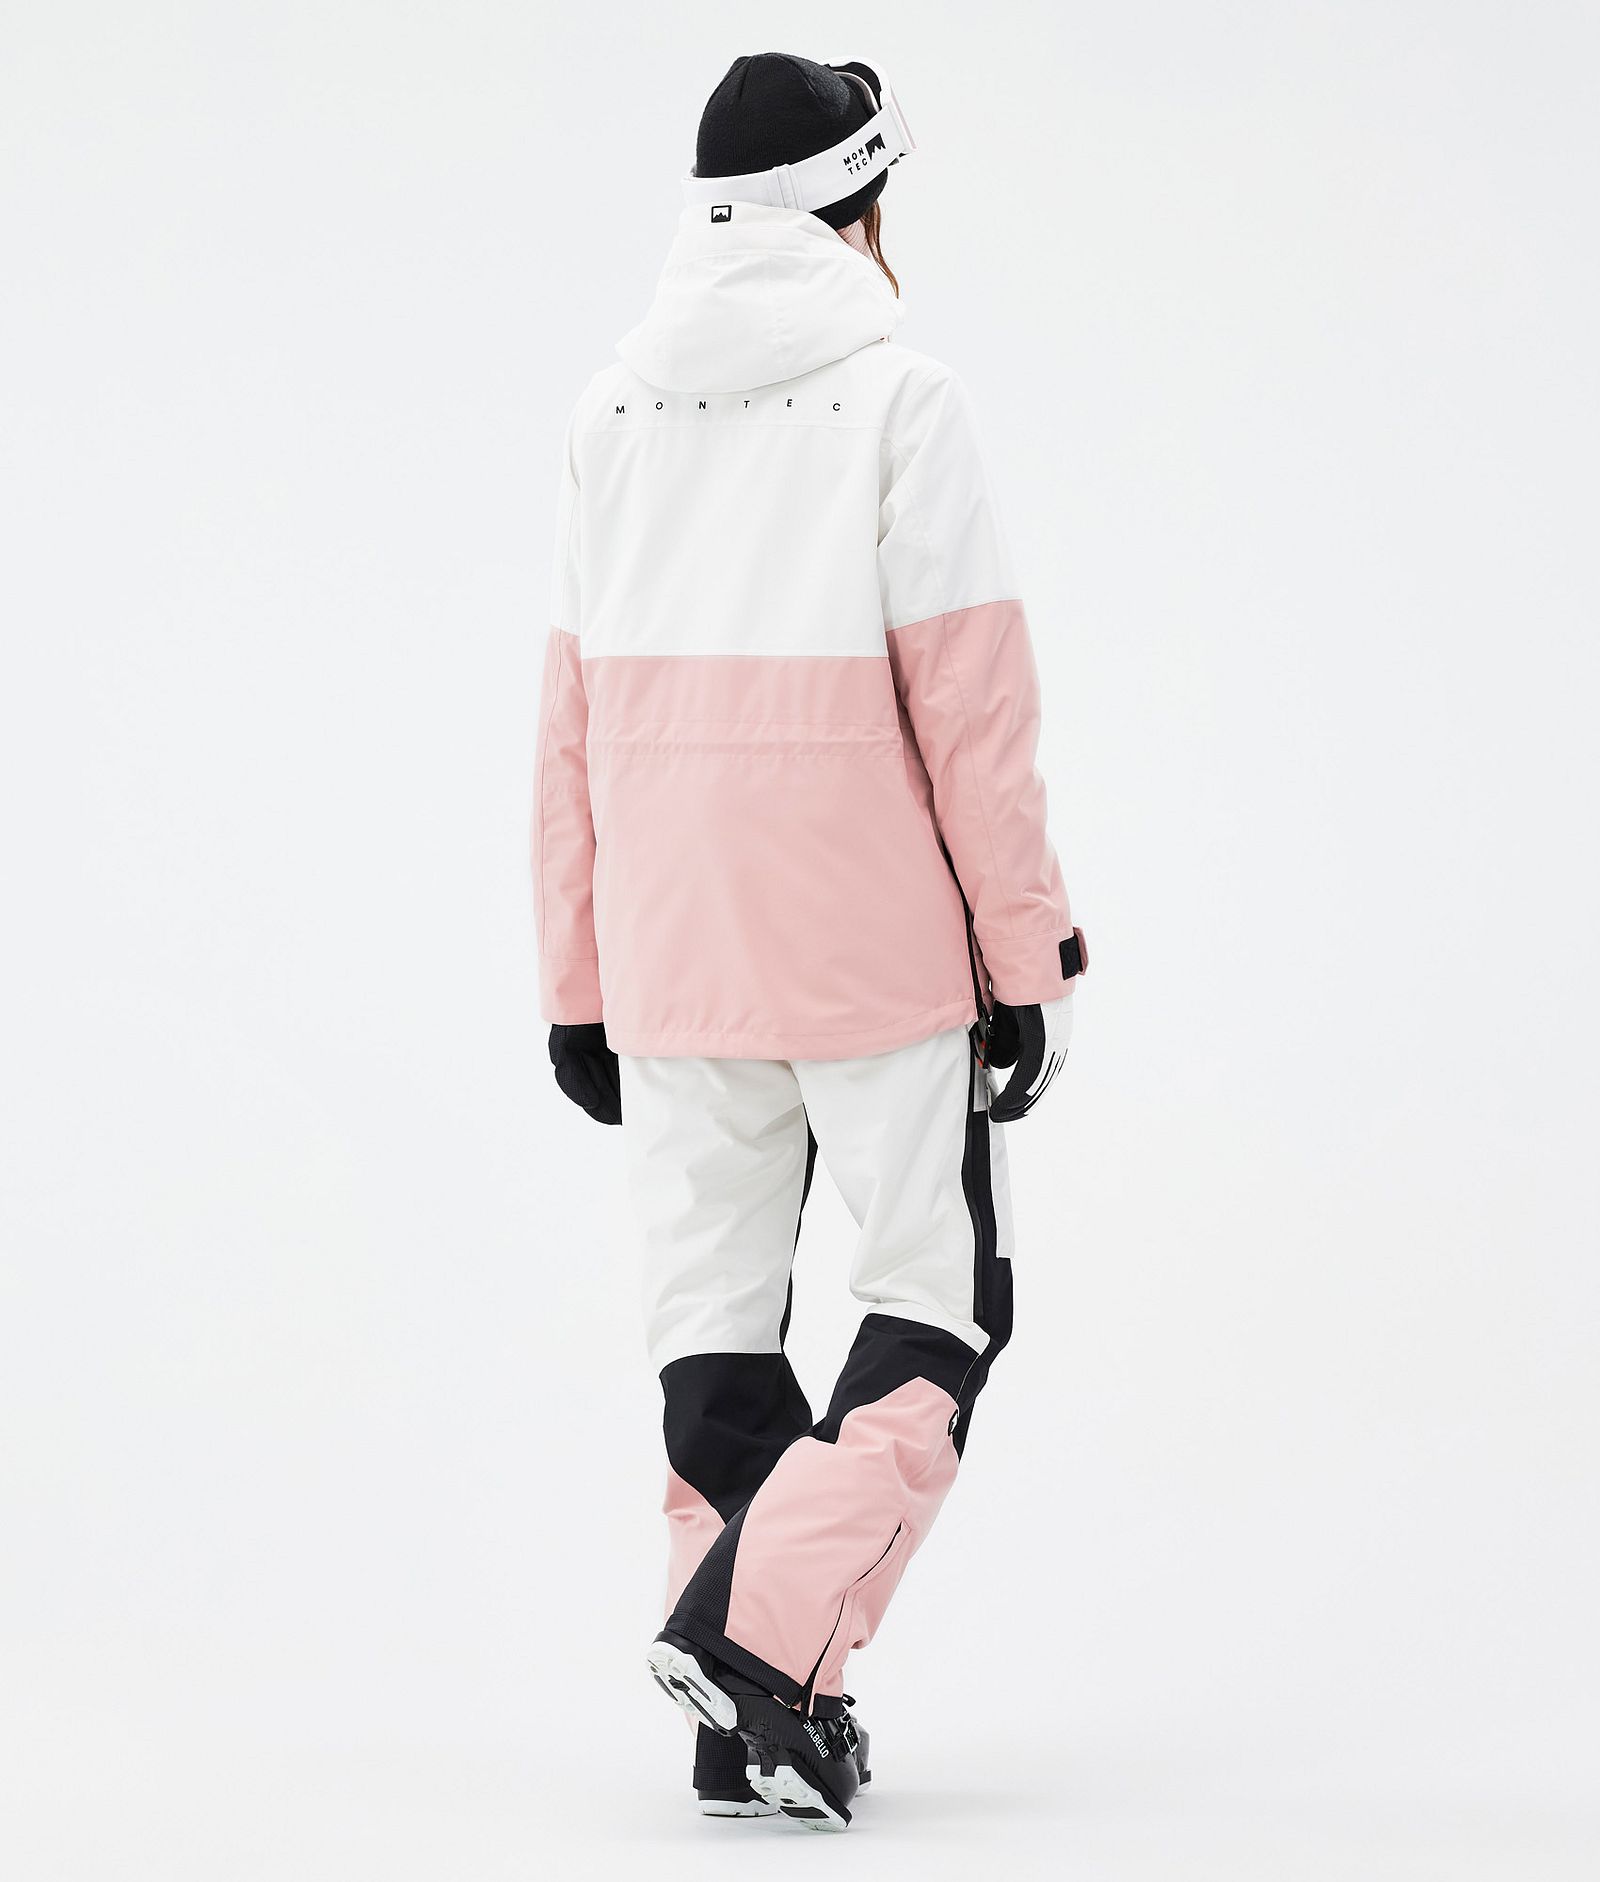 Dune W Ski Outfit Women Old White/Black/Soft Pink, Image 2 of 2